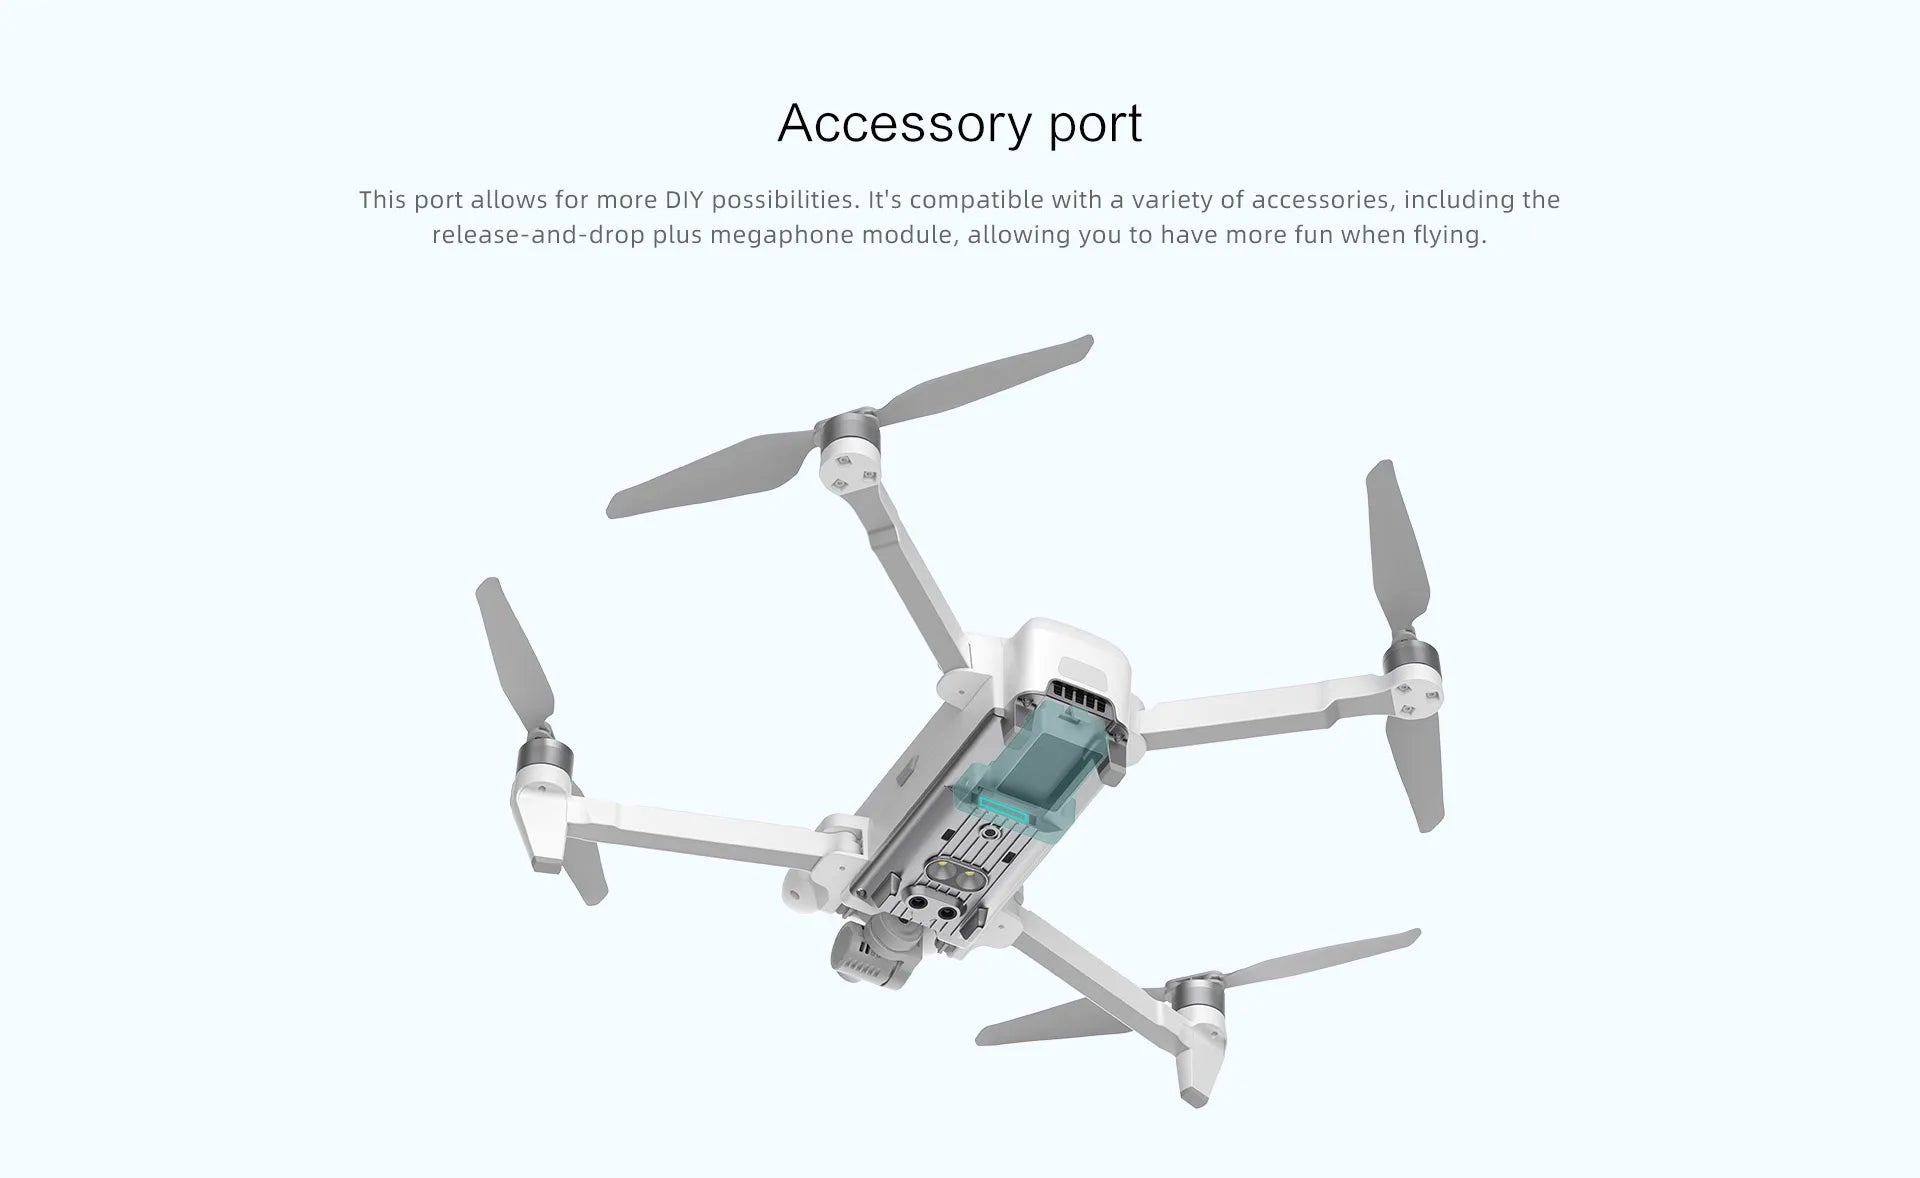 FIMI x8se 2022 V2 Camera Drone, port is compatible with release-and-drop plus megaphone module . it's compatible